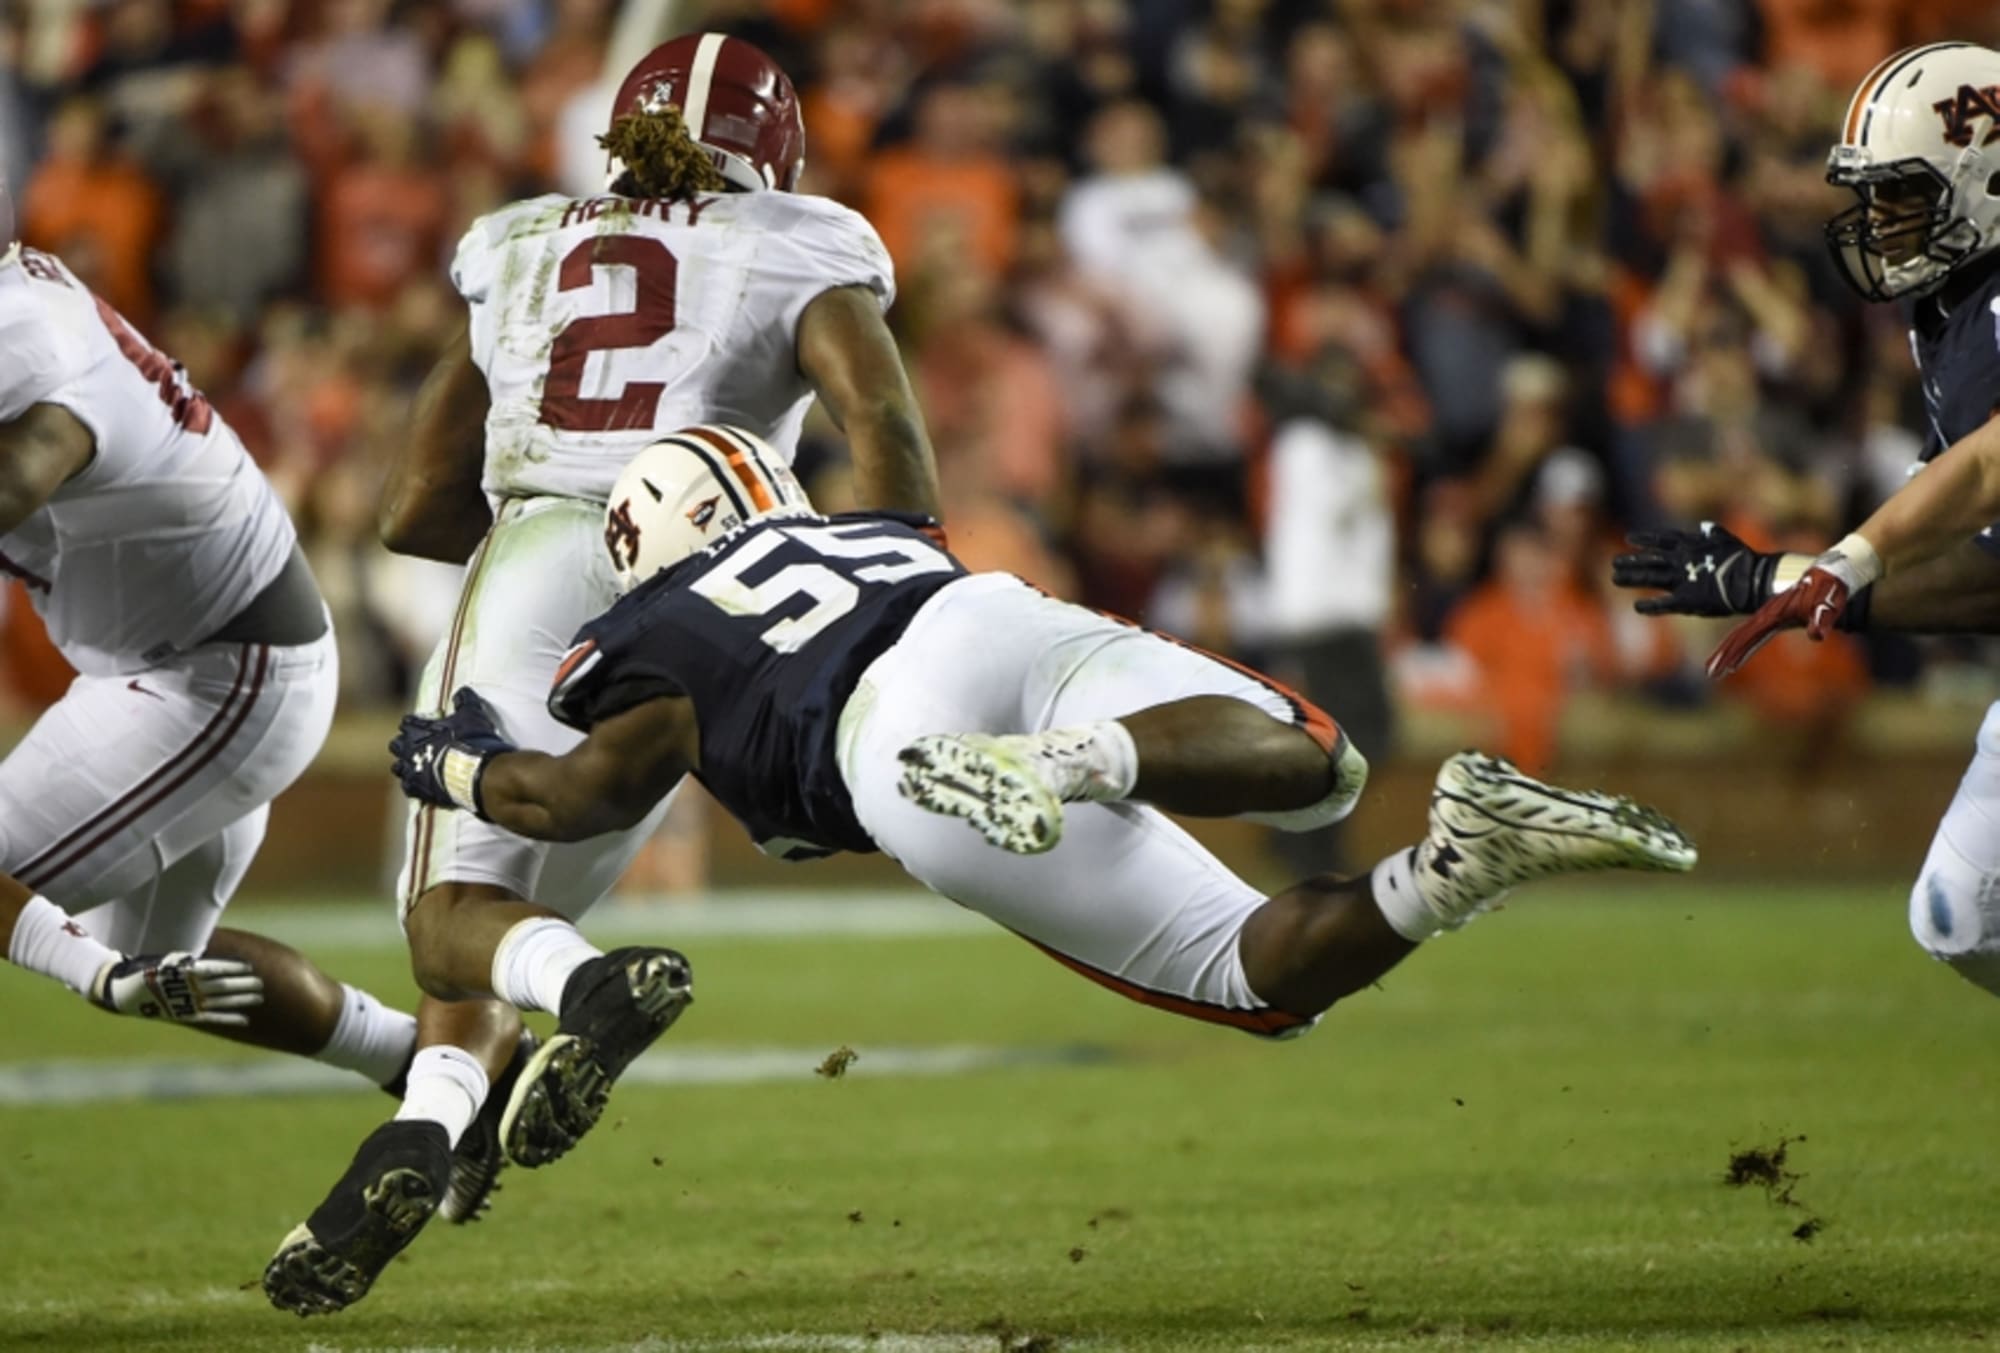 Auburn Football Players most likely to be drafted into the NFL